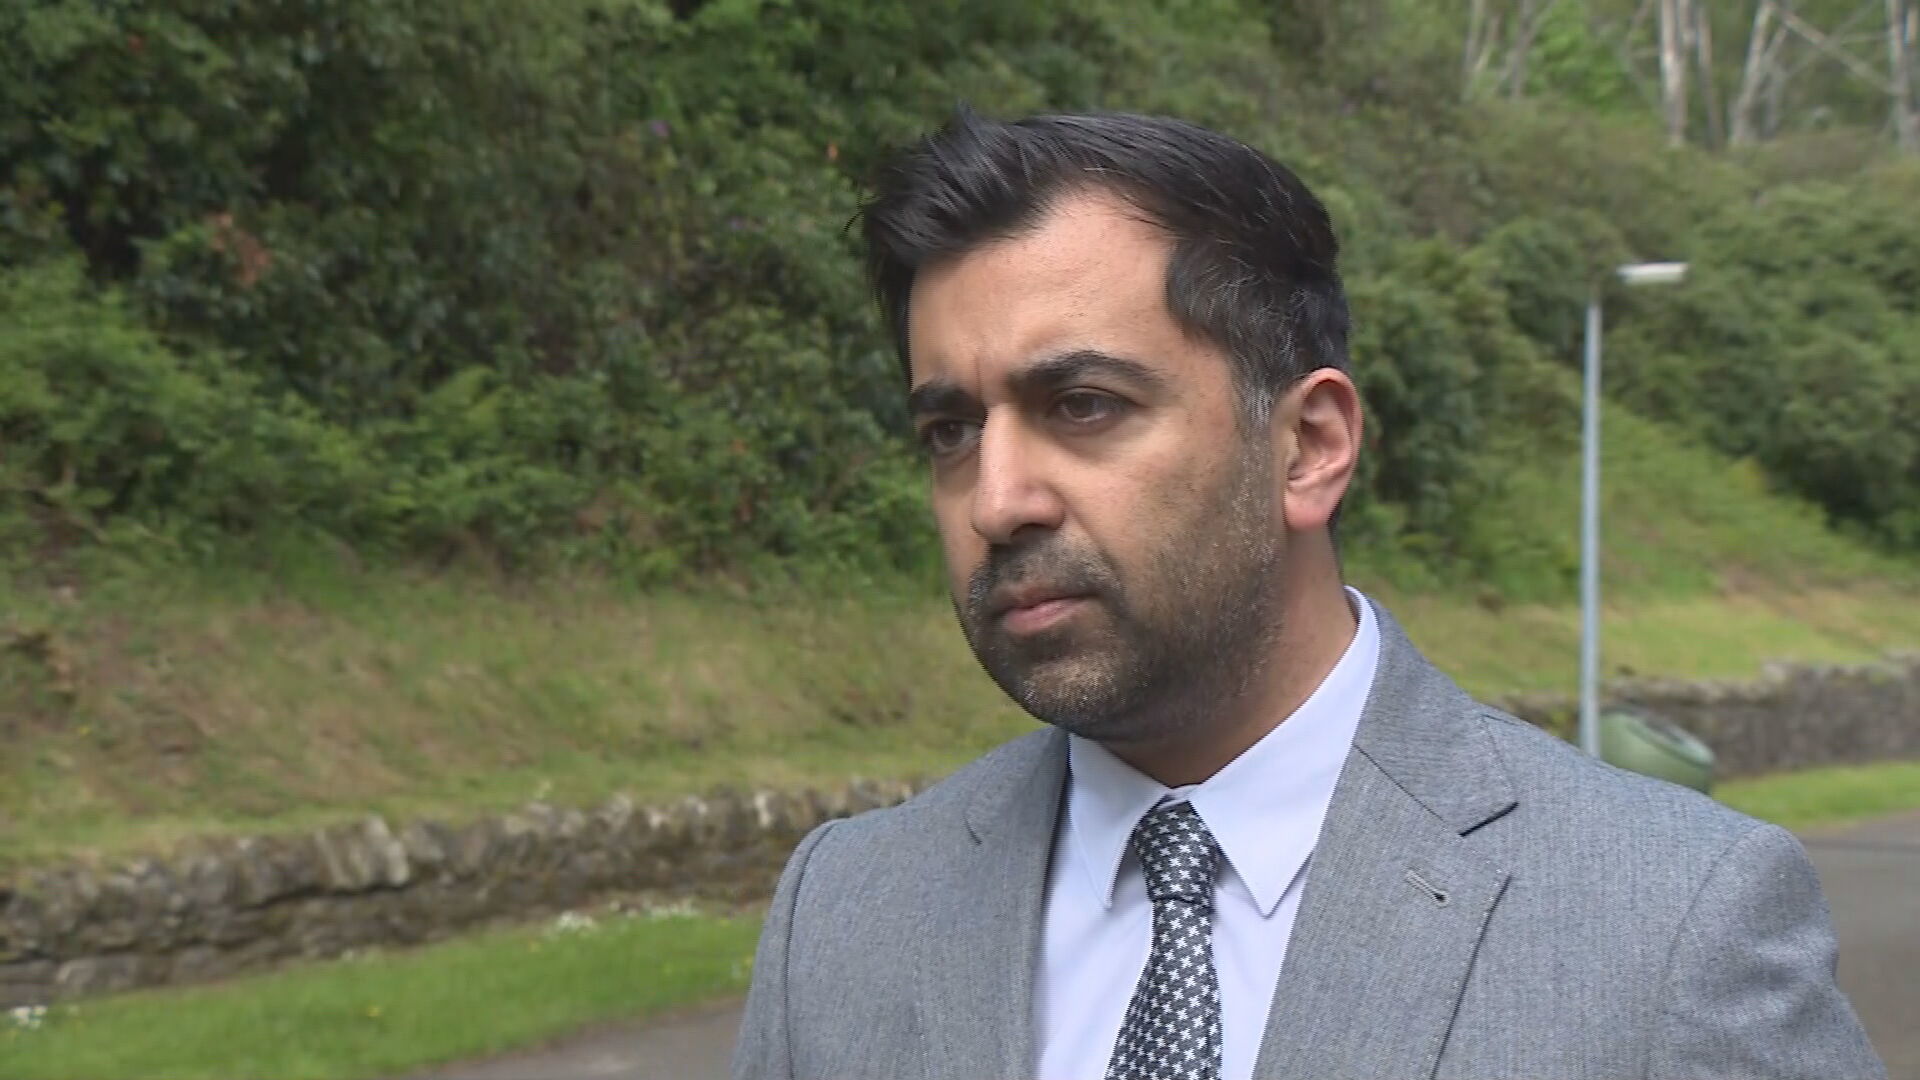 Humza Yousaf launched a new paper setting out what he said were 'radical' plans for a written constitution for Scotland

